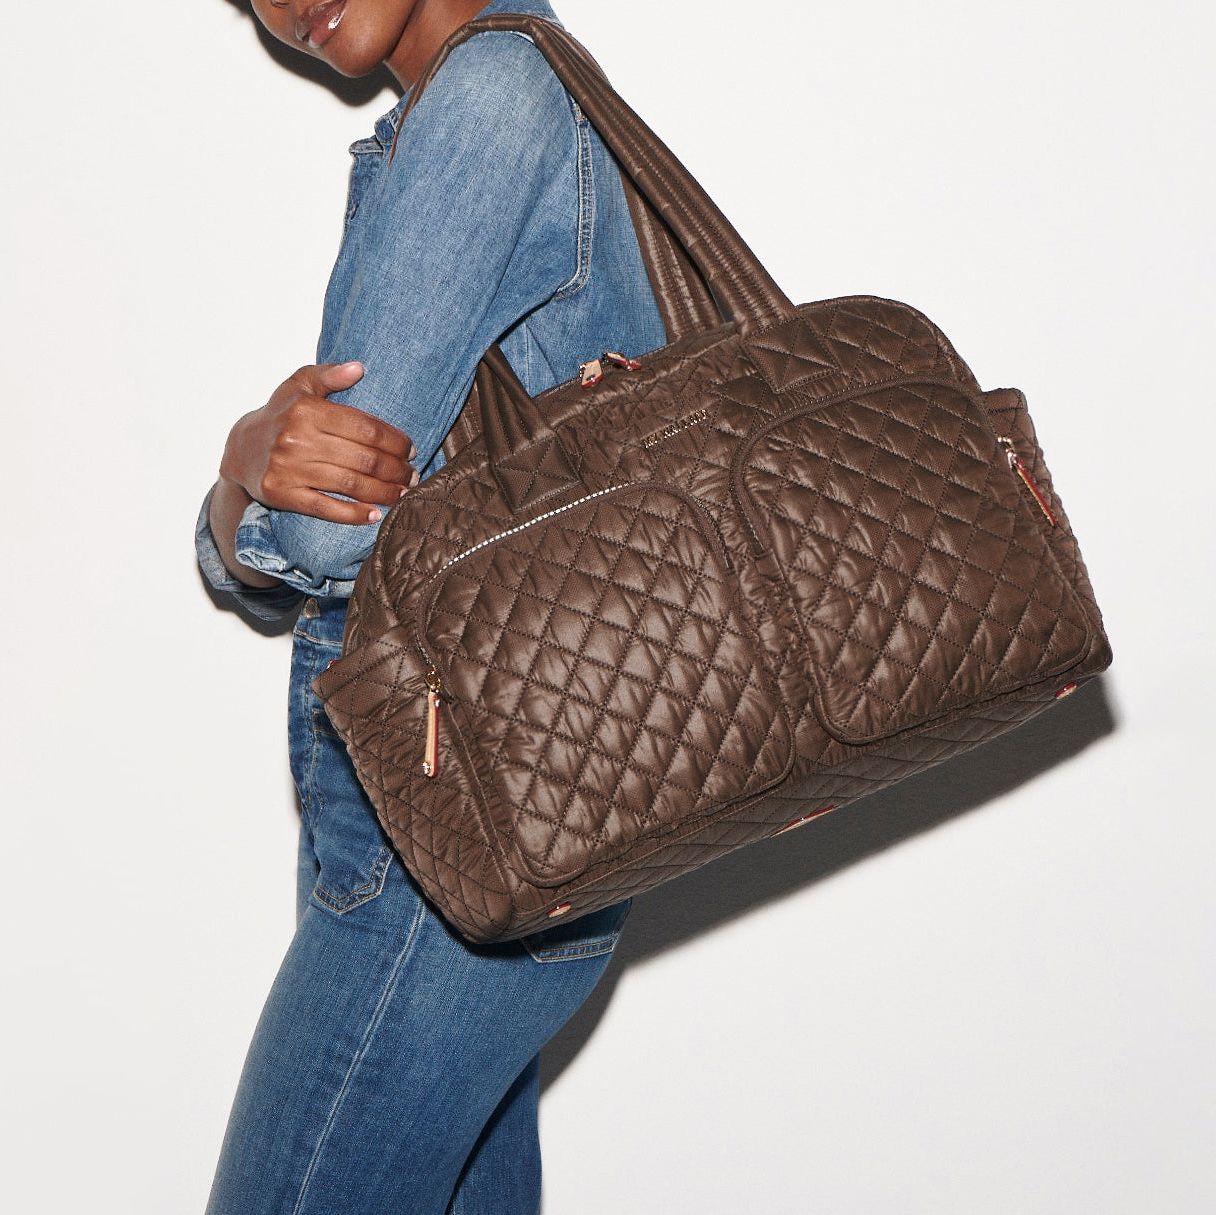 20 Chic Weekender Bags to Take Your Style On the Go